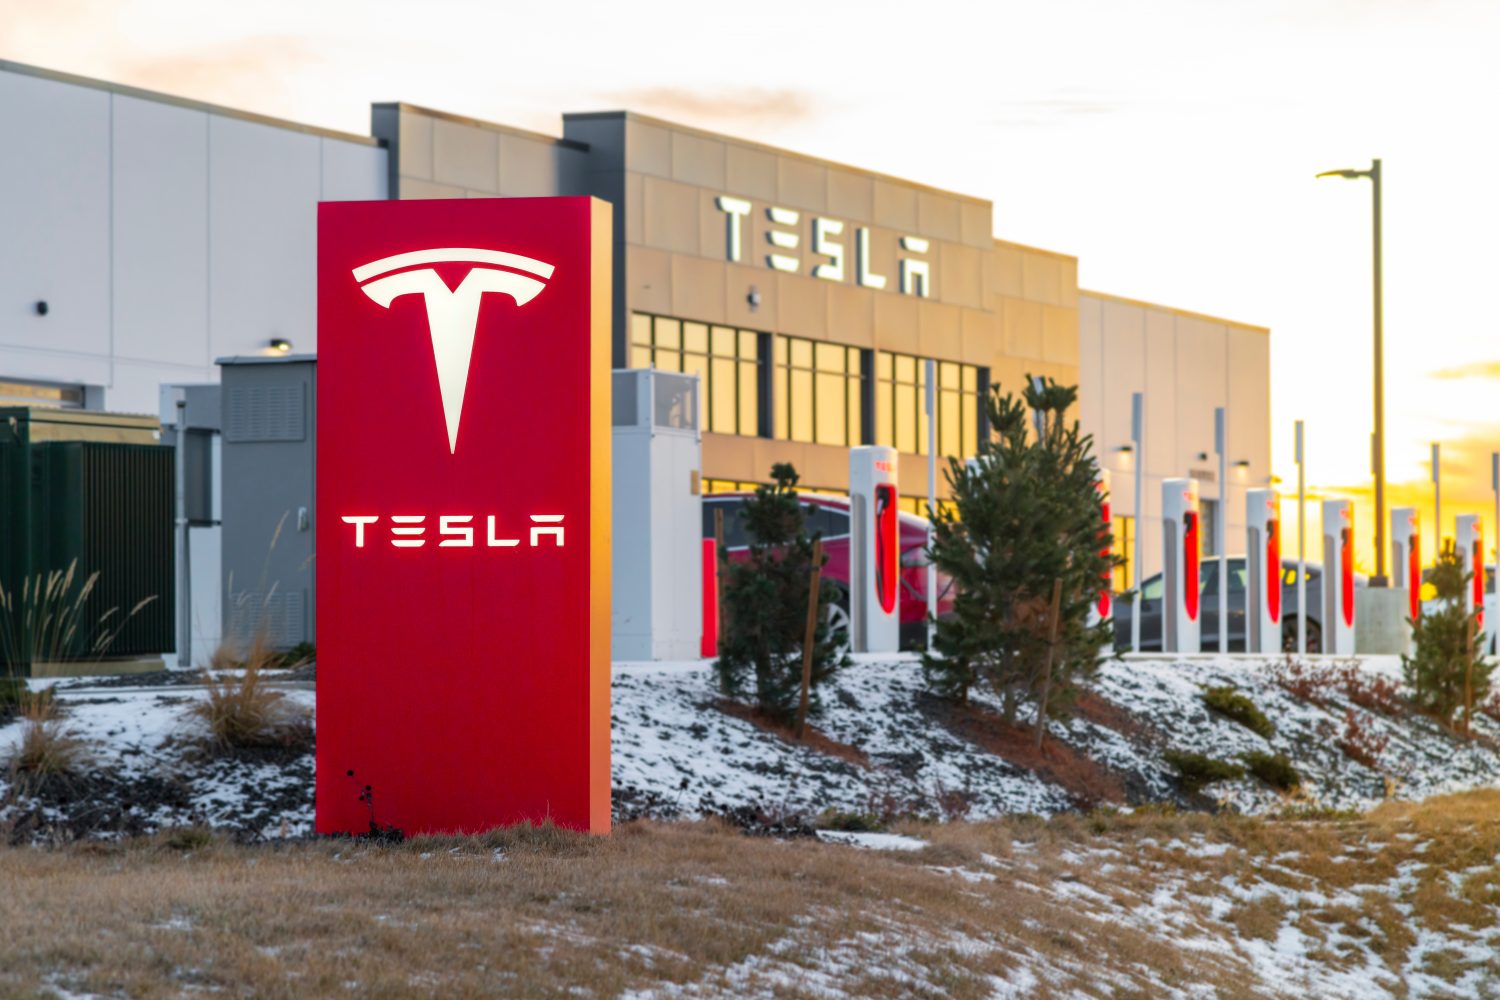 On the evening of November 17, U.S. District Judge Tina Thompson of San Francisco dismissed an antitrust lawsuit accusing Tesla of monopolizing the markets for vehicle repair and replacement